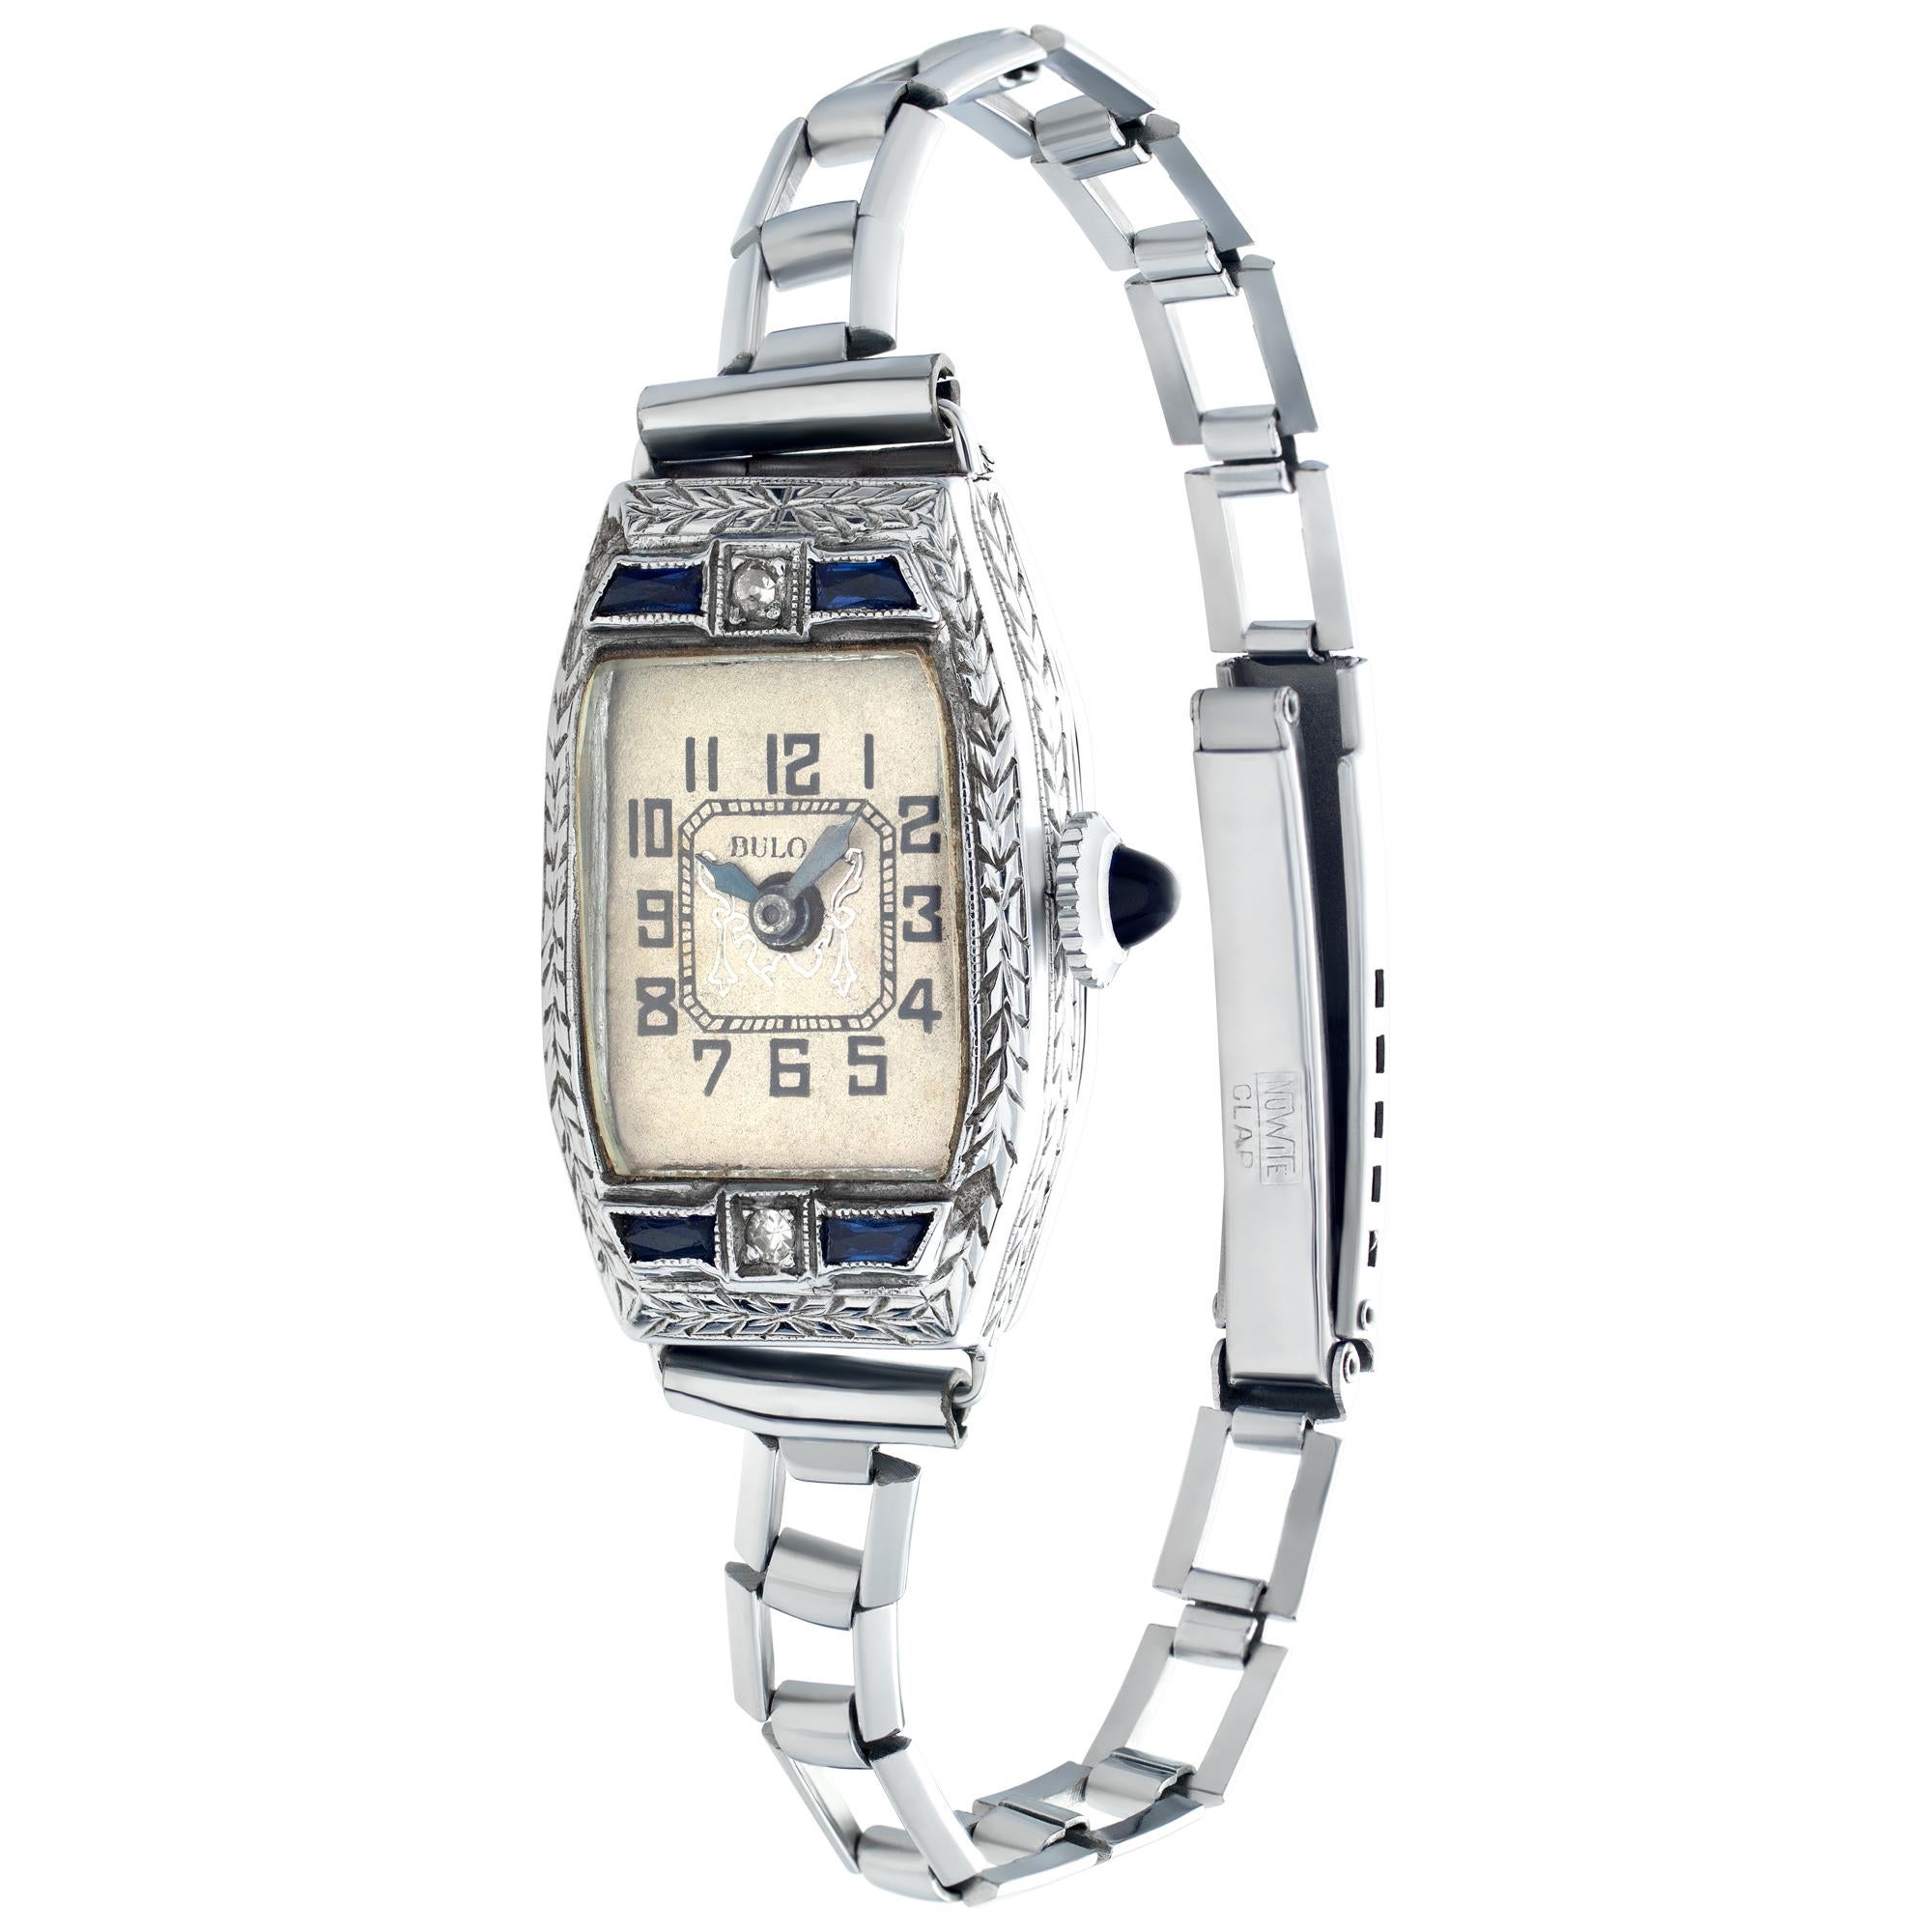 Vintage ladies Bulova in 14k white gold. Manual Circa 1940s. Fine Pre-owned Bulova Watch. Certified preowned Vintage Bulova Classic watch is made out of white gold on a 14k White Gold bracelet with a 14k Standard buckle. This Bulova watch has a 17 